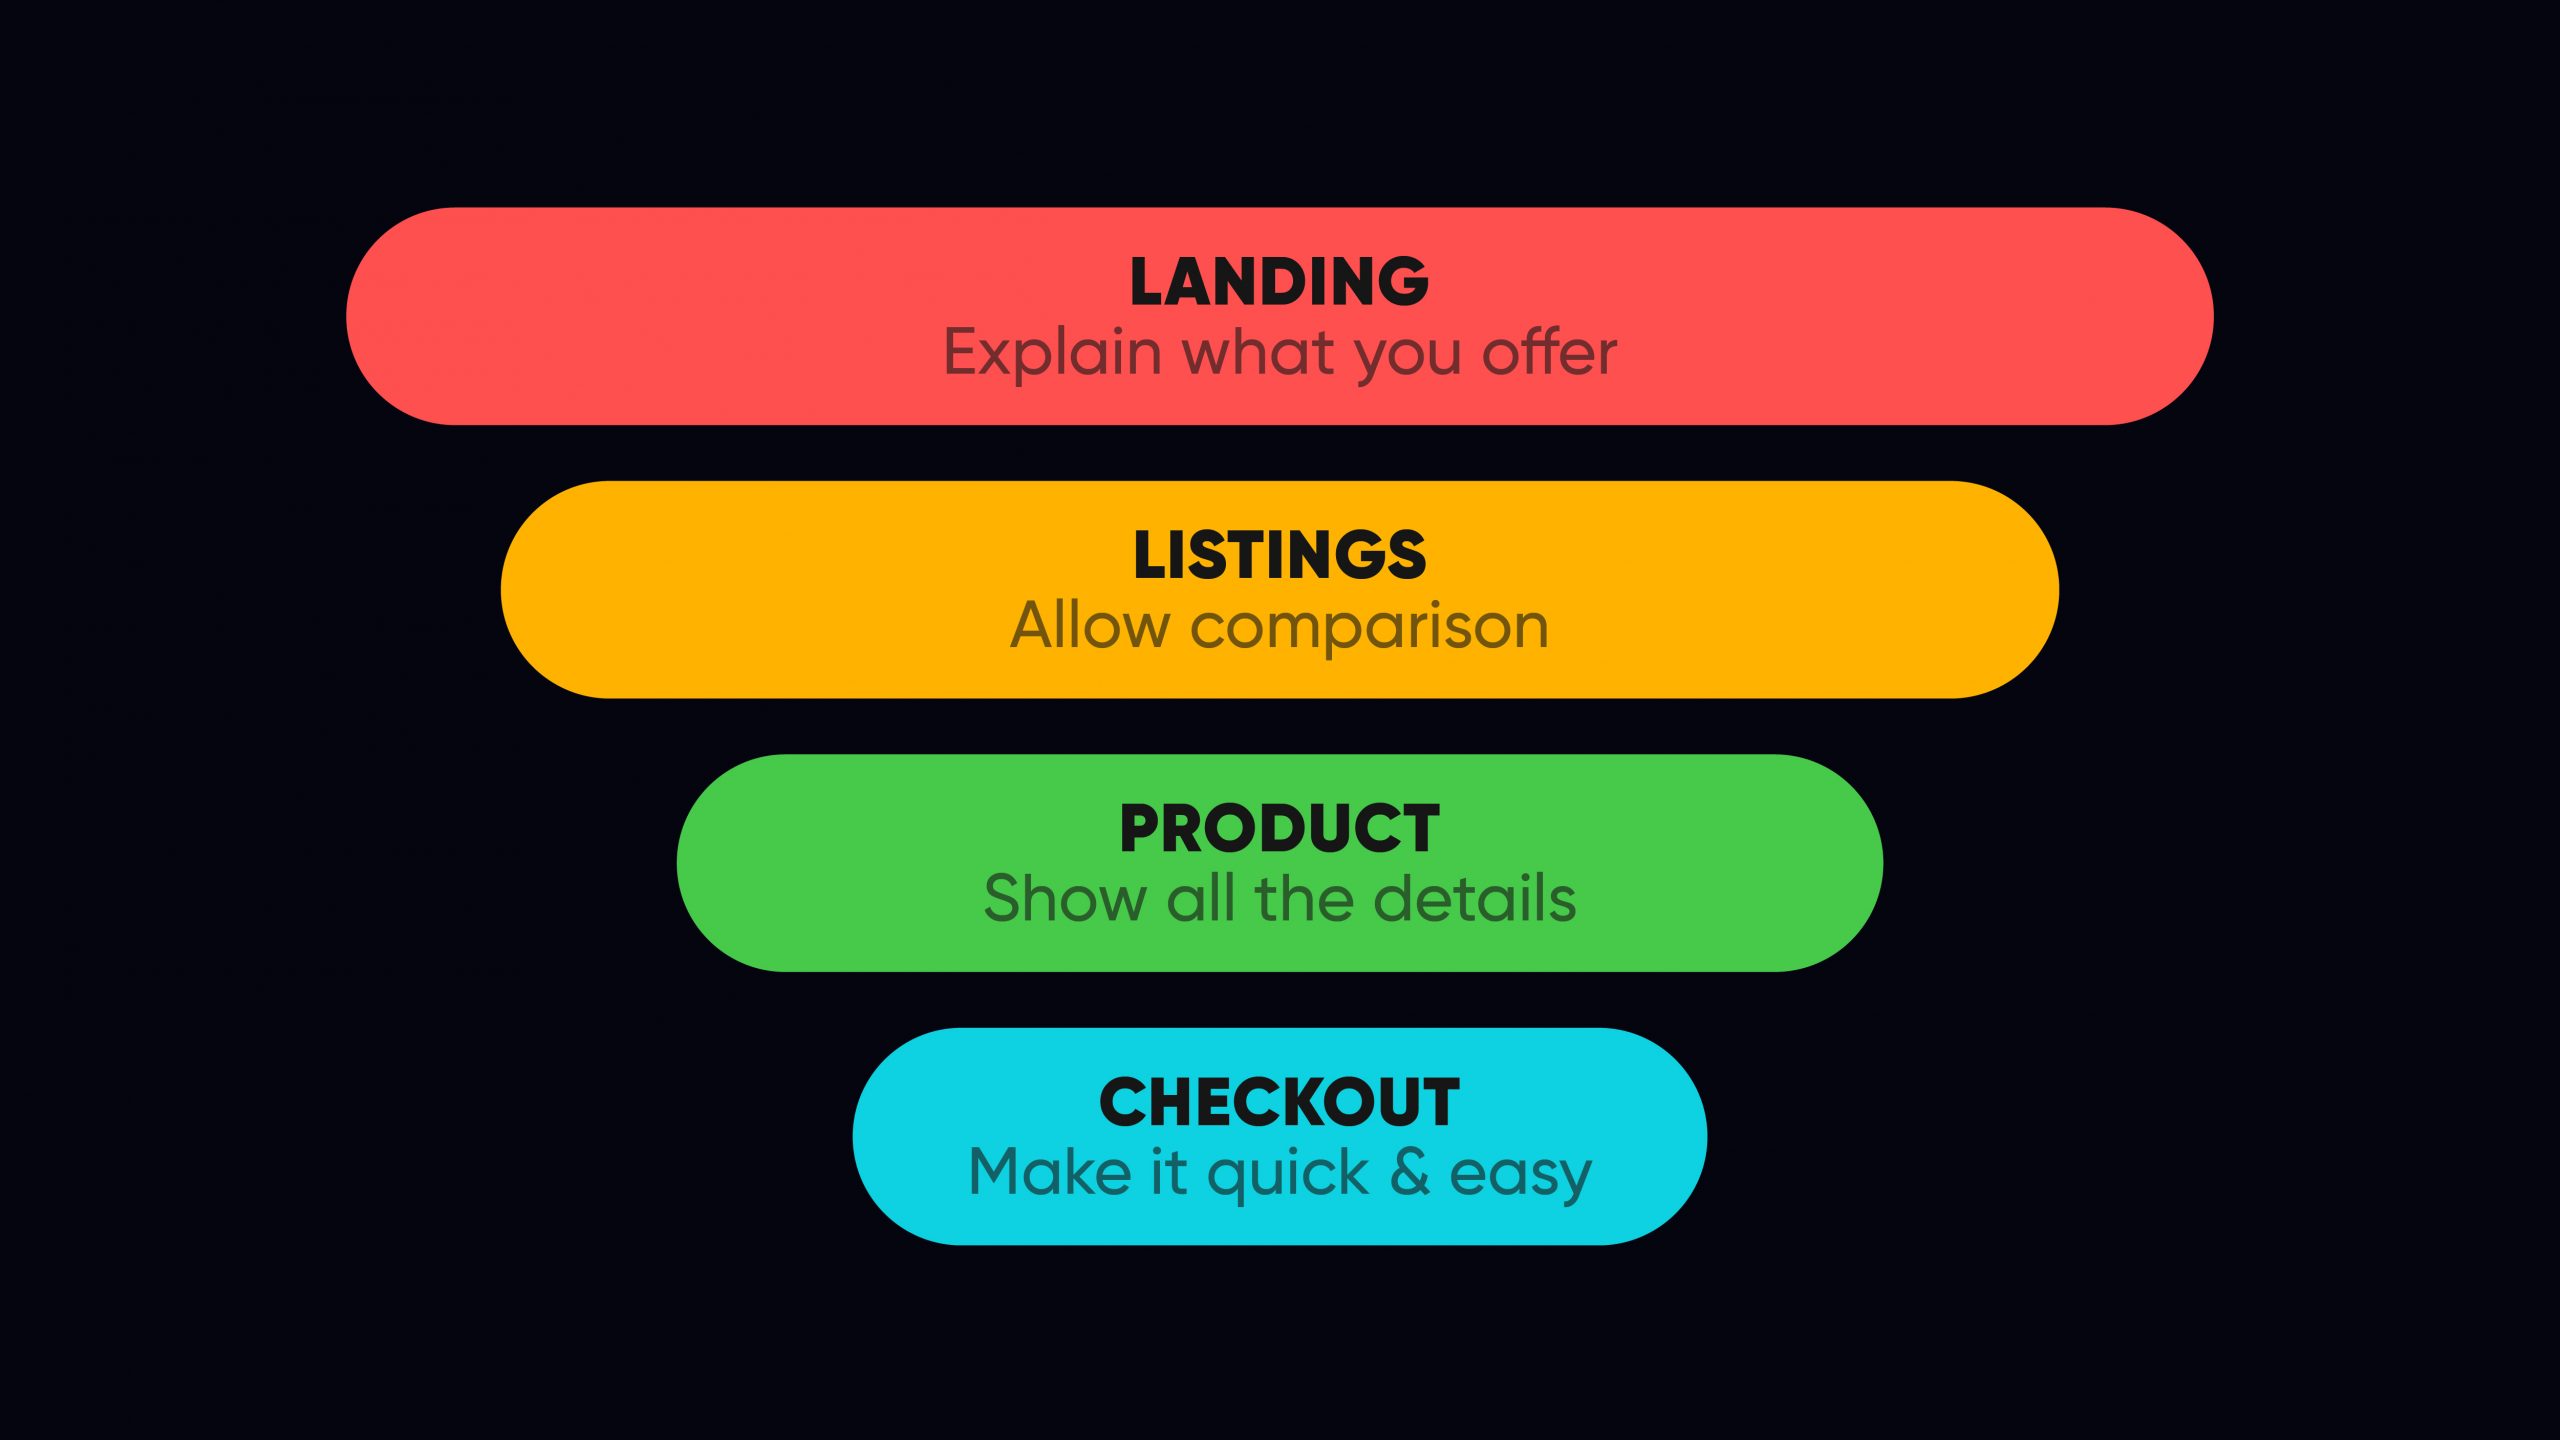 User journey mapping across the conversion funnel